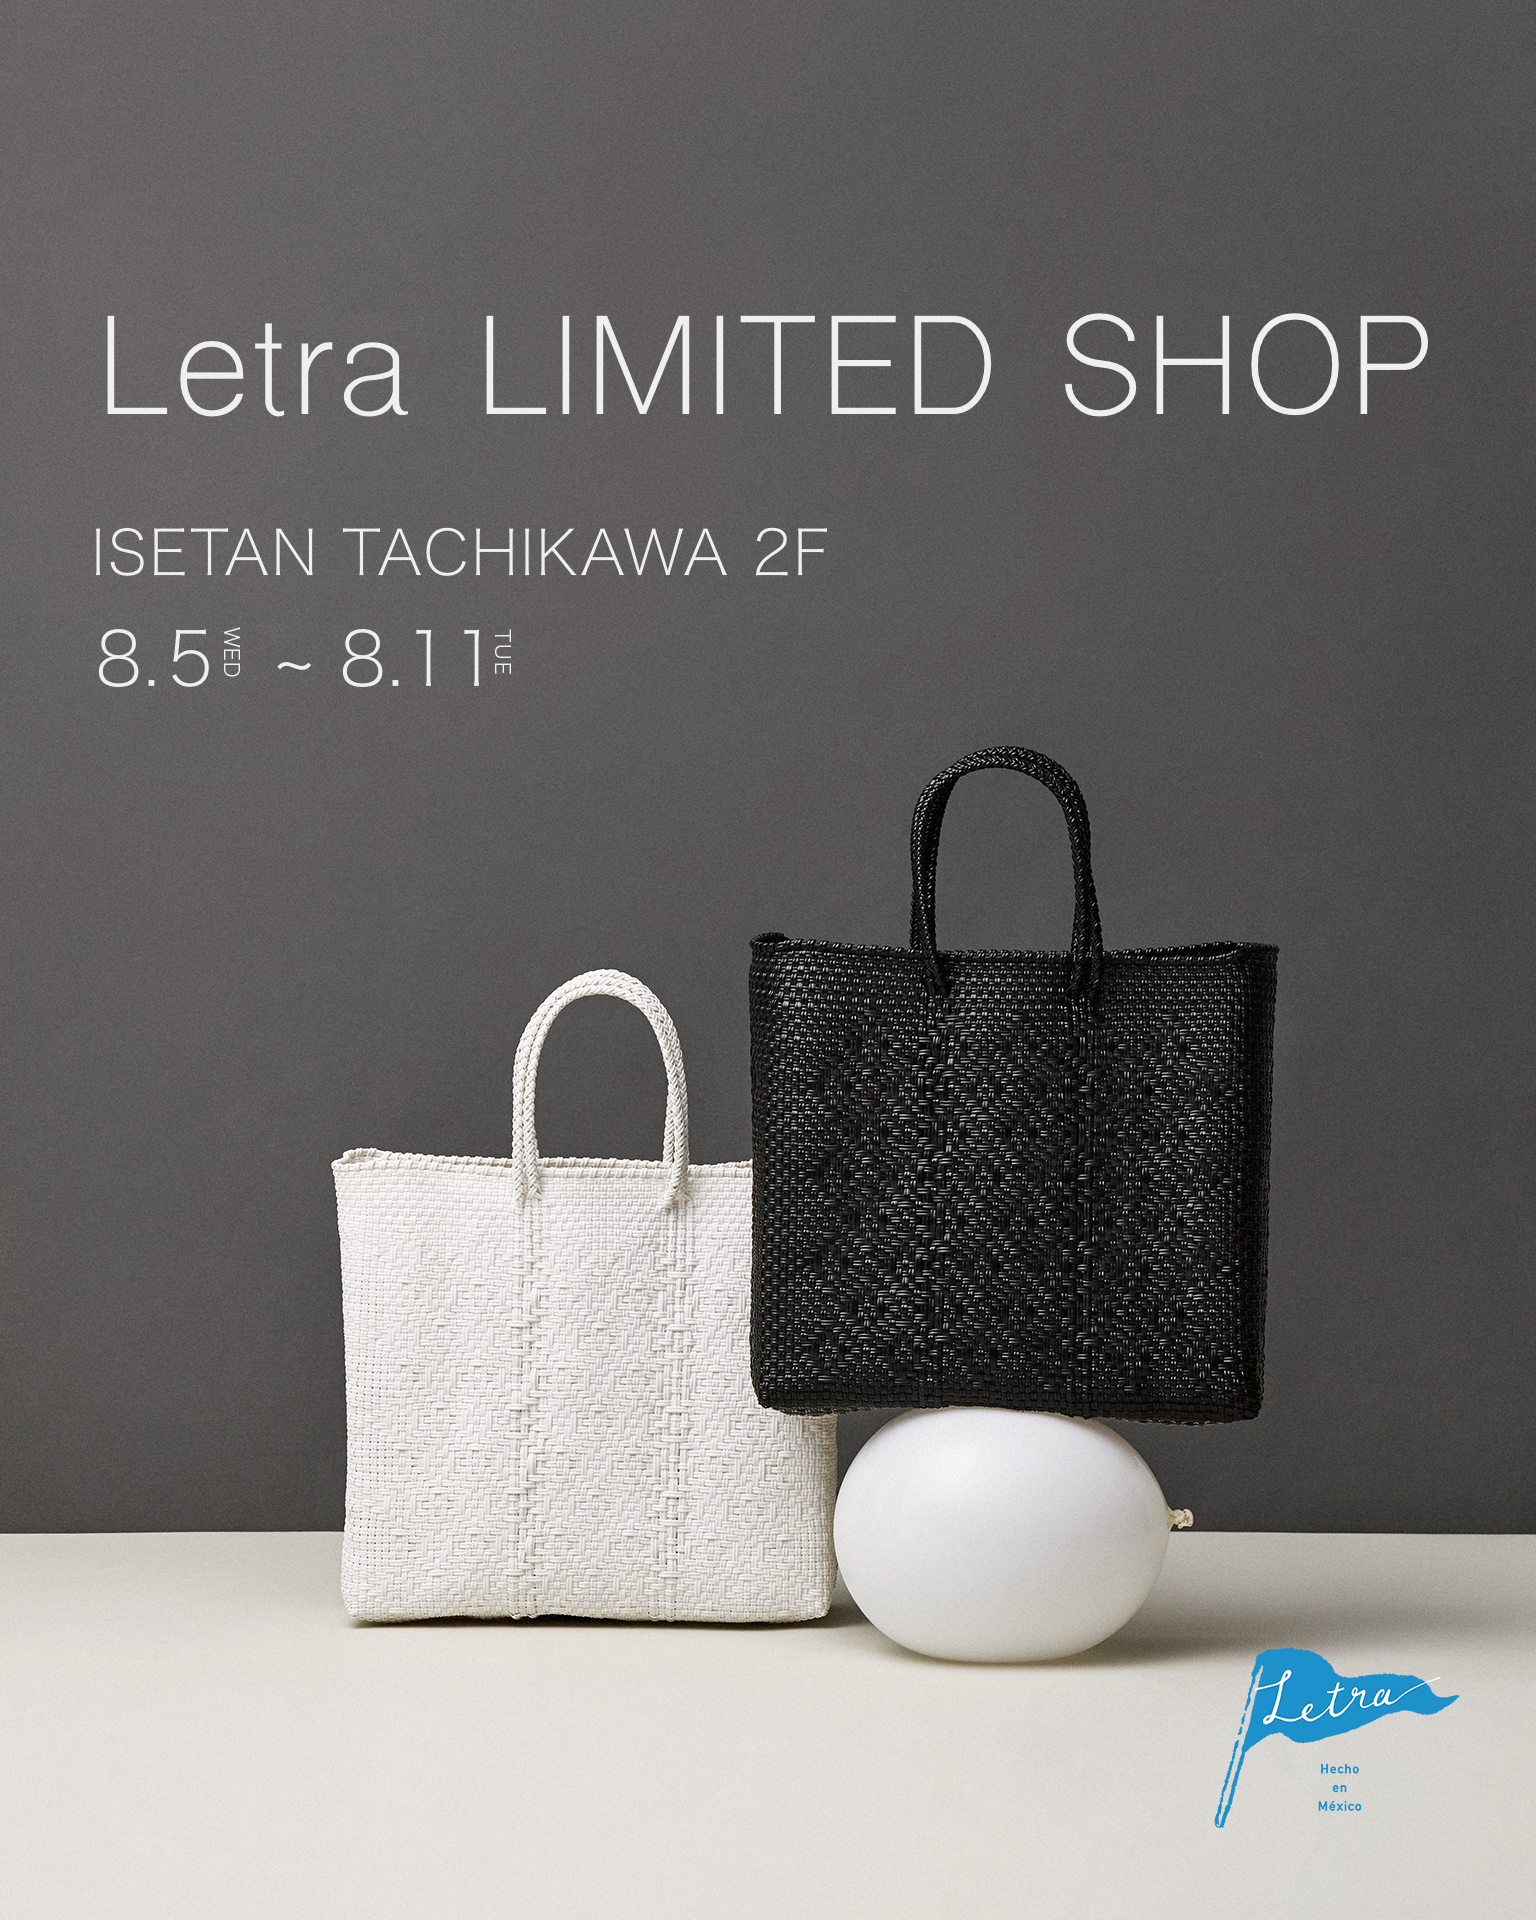 Letra Limited Shop 伊勢丹立川 OPEN！